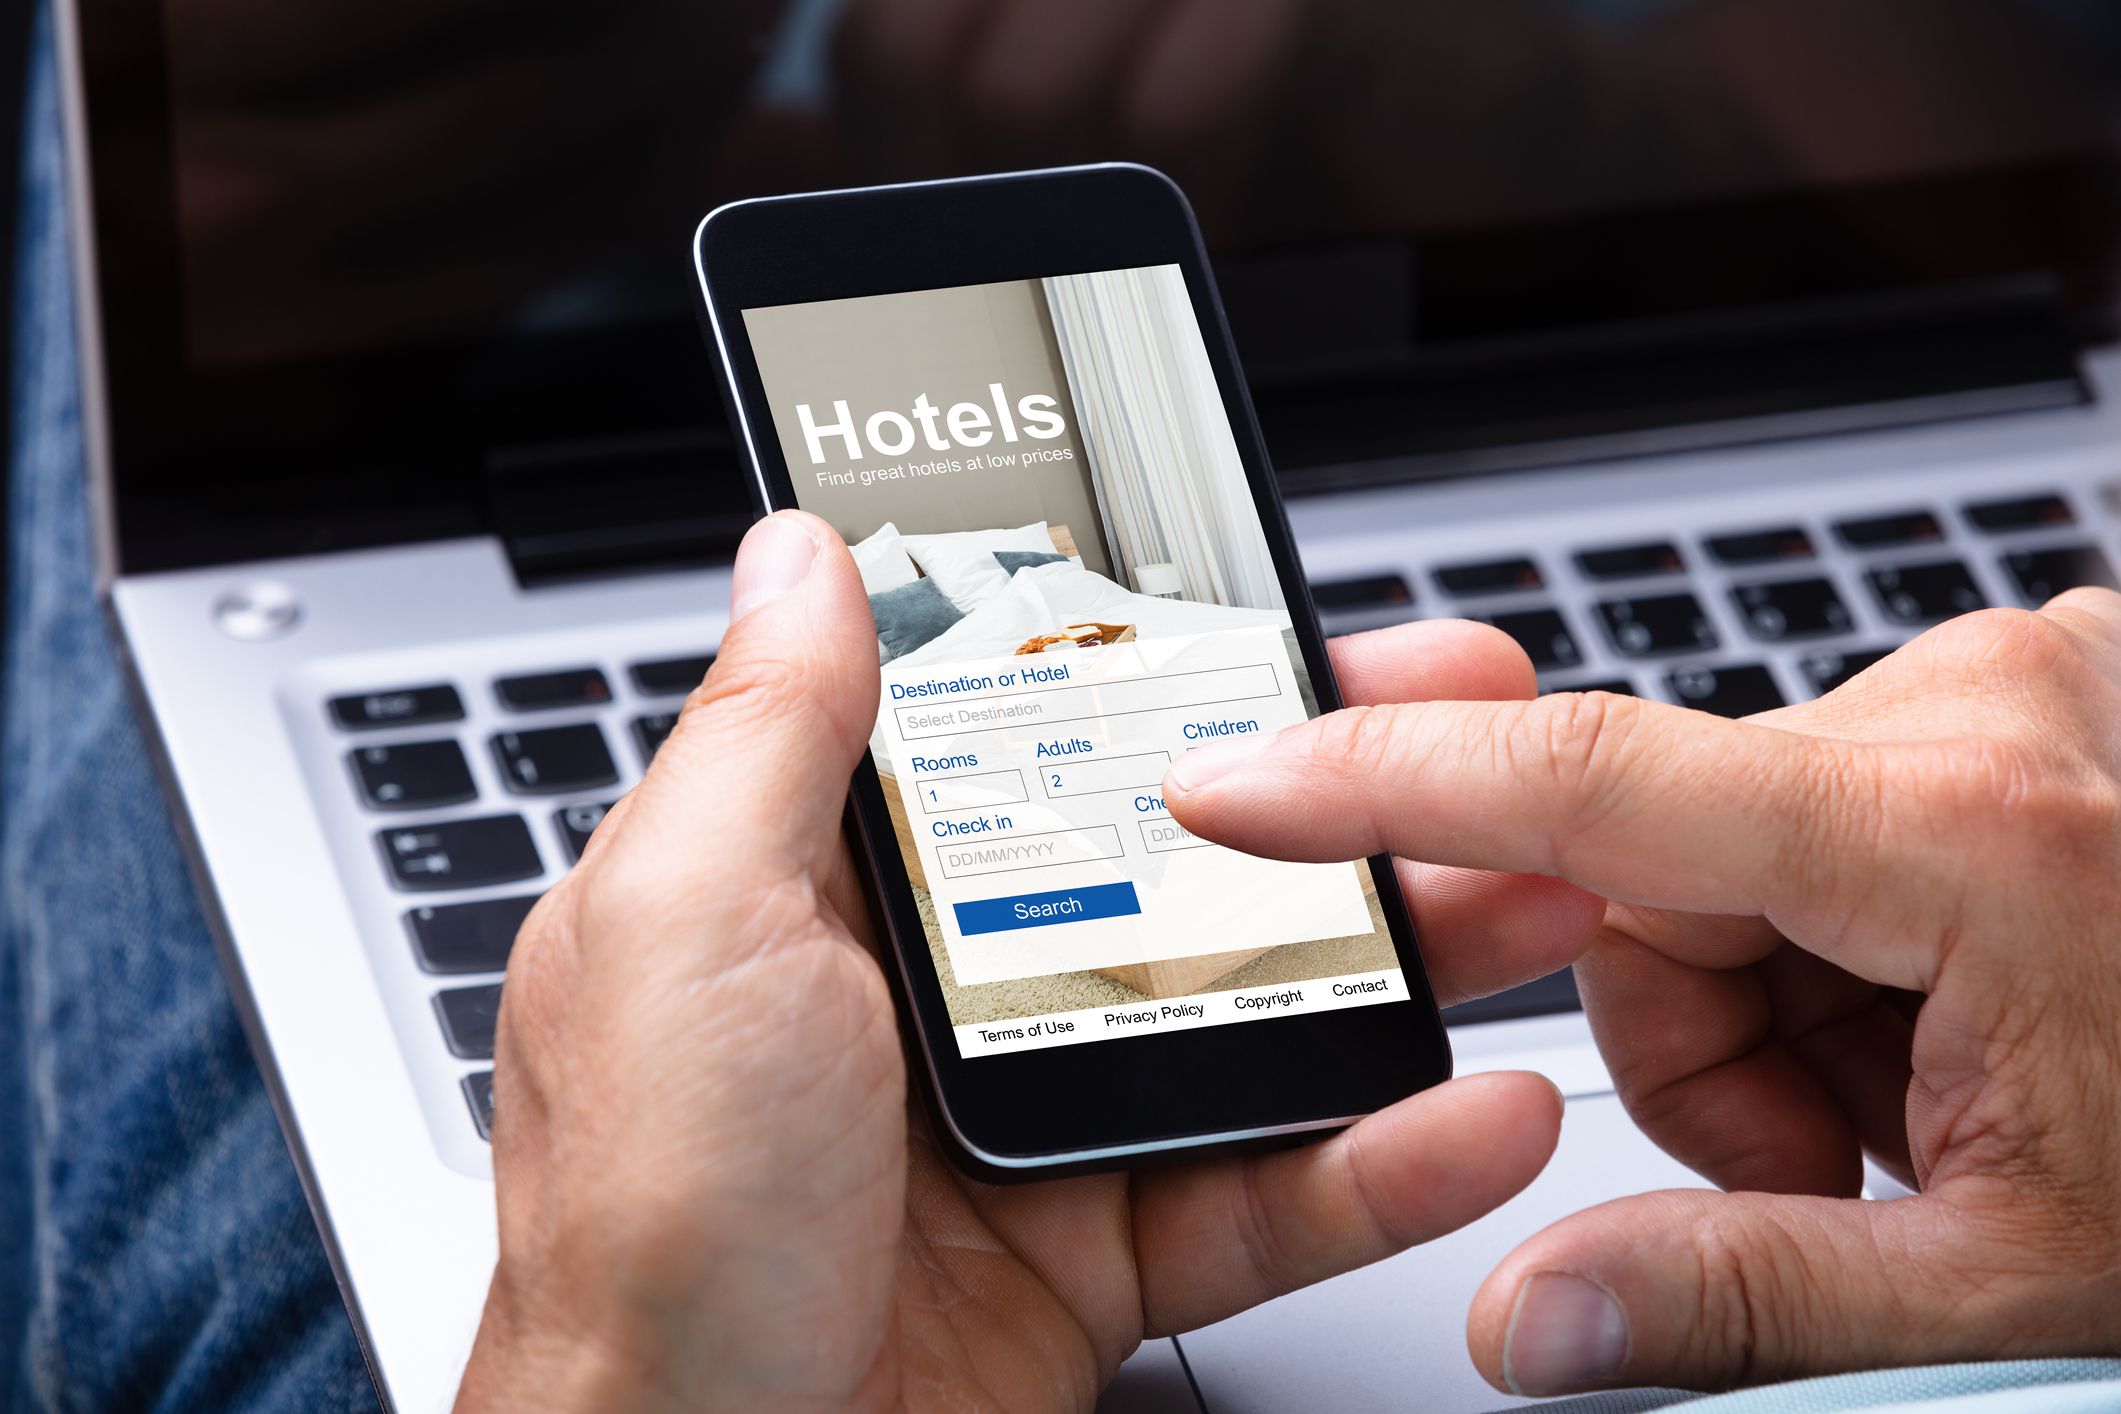 A <a href="https://www.nerdwallet.com/article/travel/is-it-cheaper-to-book-hotel-last-minute"> recent study by NerdWallet</a> took a look at over 2,500 hotel room rates throughout 2019, 2020, and then the first half of 2021. These hotels were plotted out across the globe, had a wide variety when it came to the class and brand, and then the room rates themselves were compared for nights 15 days out vs. four months out. <p>As often as 66% of the time, the hotel rooms were cheaper when booked 15 days out vs. four months out. Then, the disparity ended up being even more noticeable in 2021, where folks had an even better chance at scoring a deal through booking a hotel room last-minute. Those same rooms that NerdWallet’s team analyzed from 2021 ended up being cheaper 73% of the time when they were booked 15 days out vs. four months out. </p><p><b>Related: </b><a href="https://blog.cheapism.com/hostel-vs-hotel-according-to-redditors/">Hostel vs. Hotel: Why Redditors Are Ditching Hostels and Airbnbs for Hotels</a></p>